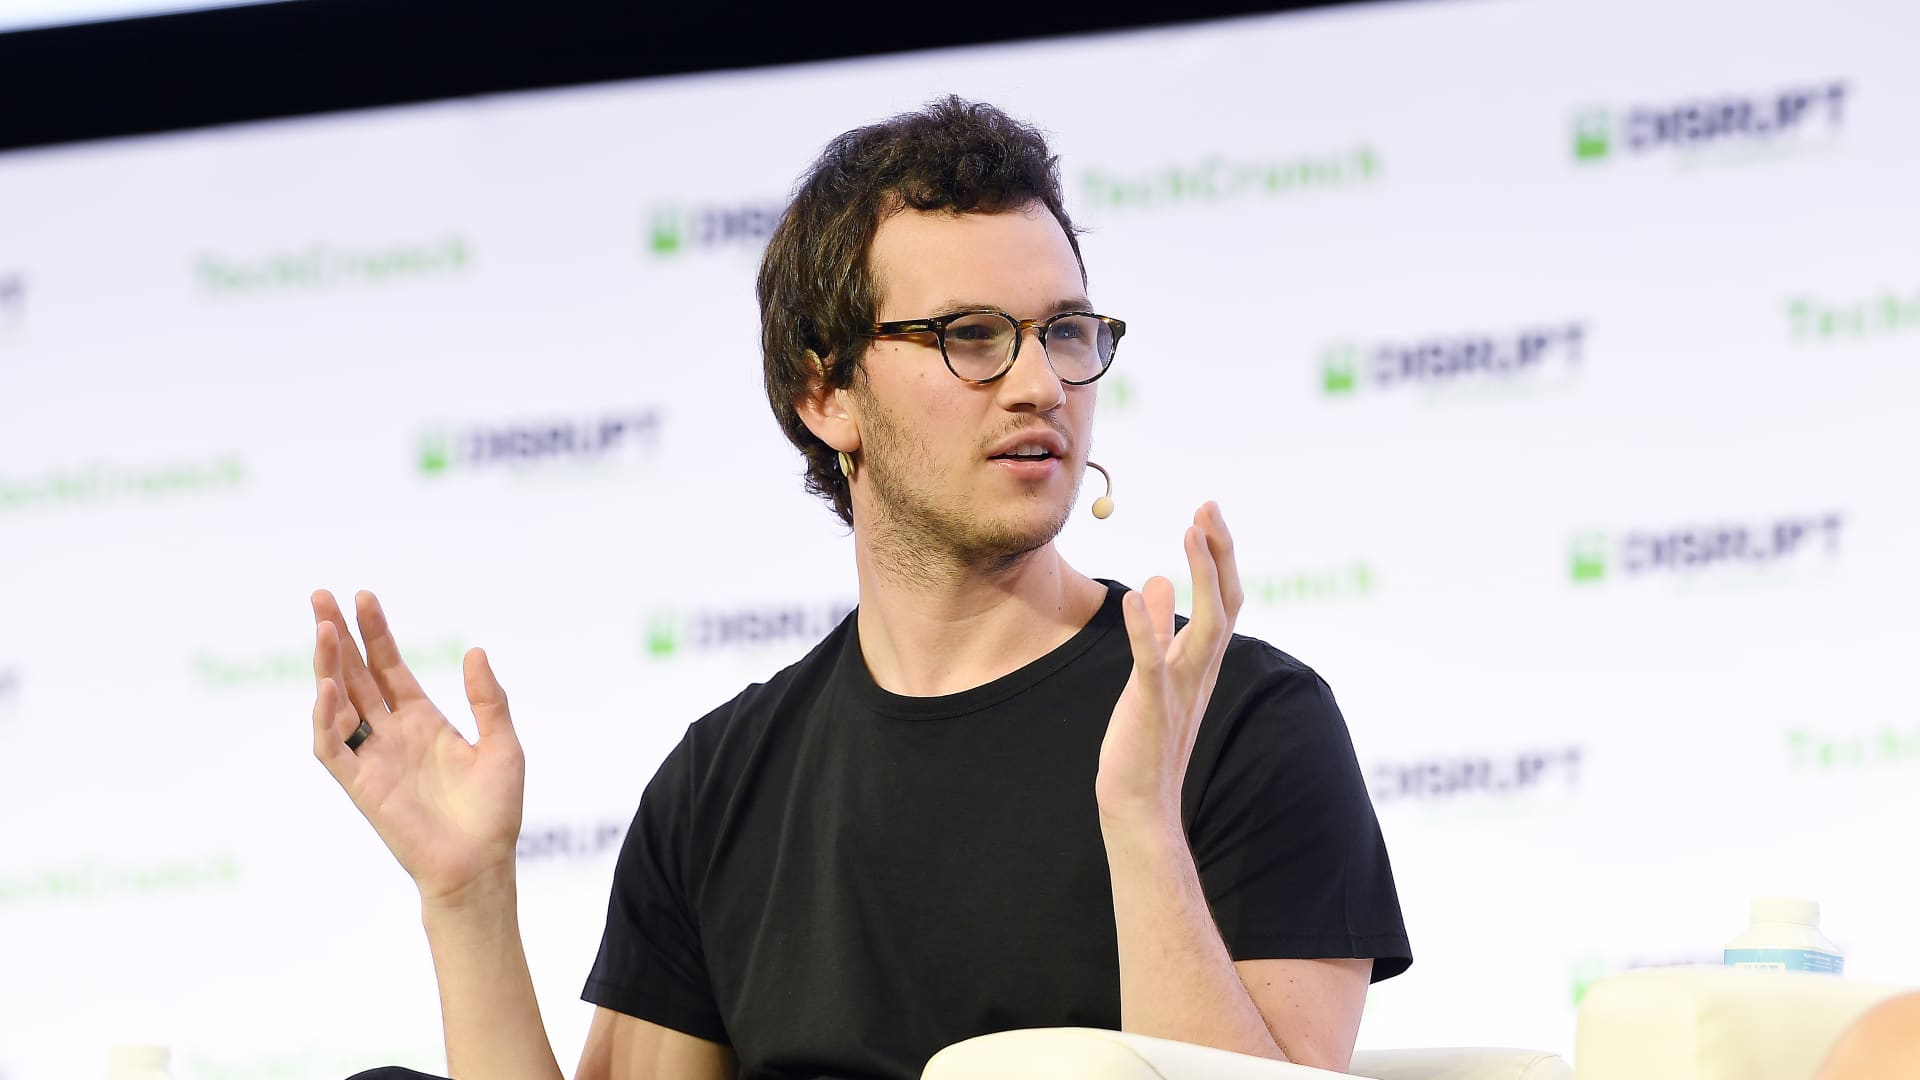 Brex Co-Founder & CEO Henrique Dubugras speaks onstage during TechCrunch Disrupt San Francisco 2019 at Moscone Convention Center on October 02, 2019 in San Francisco, California.